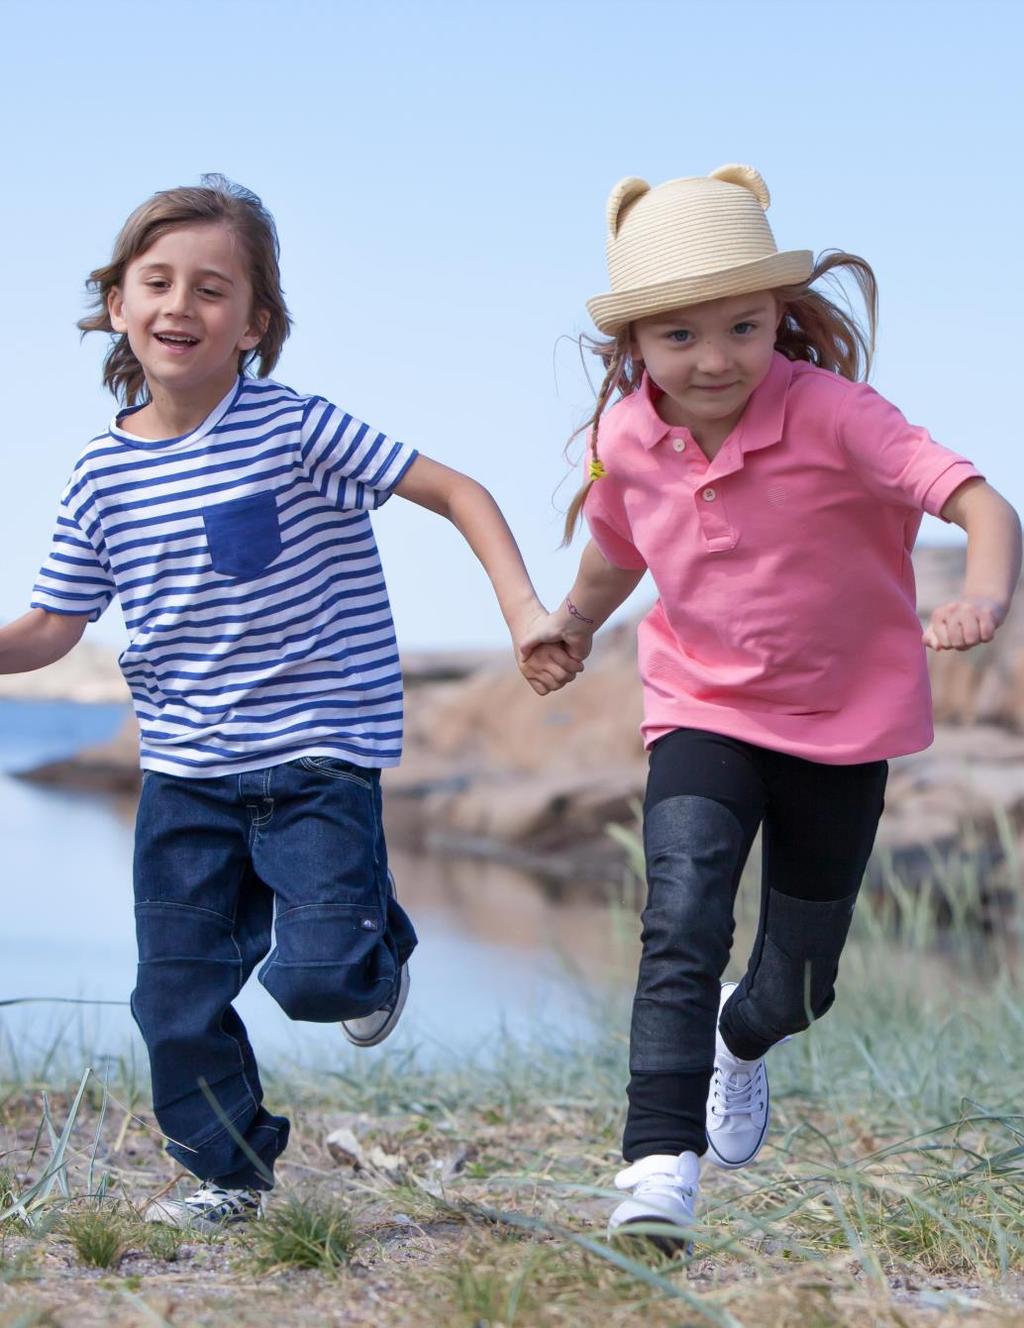 OSSOAMI The brand Tougher jeans for kids! OSSOAMI offers kids pants that allow kids to be kids. Designed and tested by children To satisfy and appeal children.